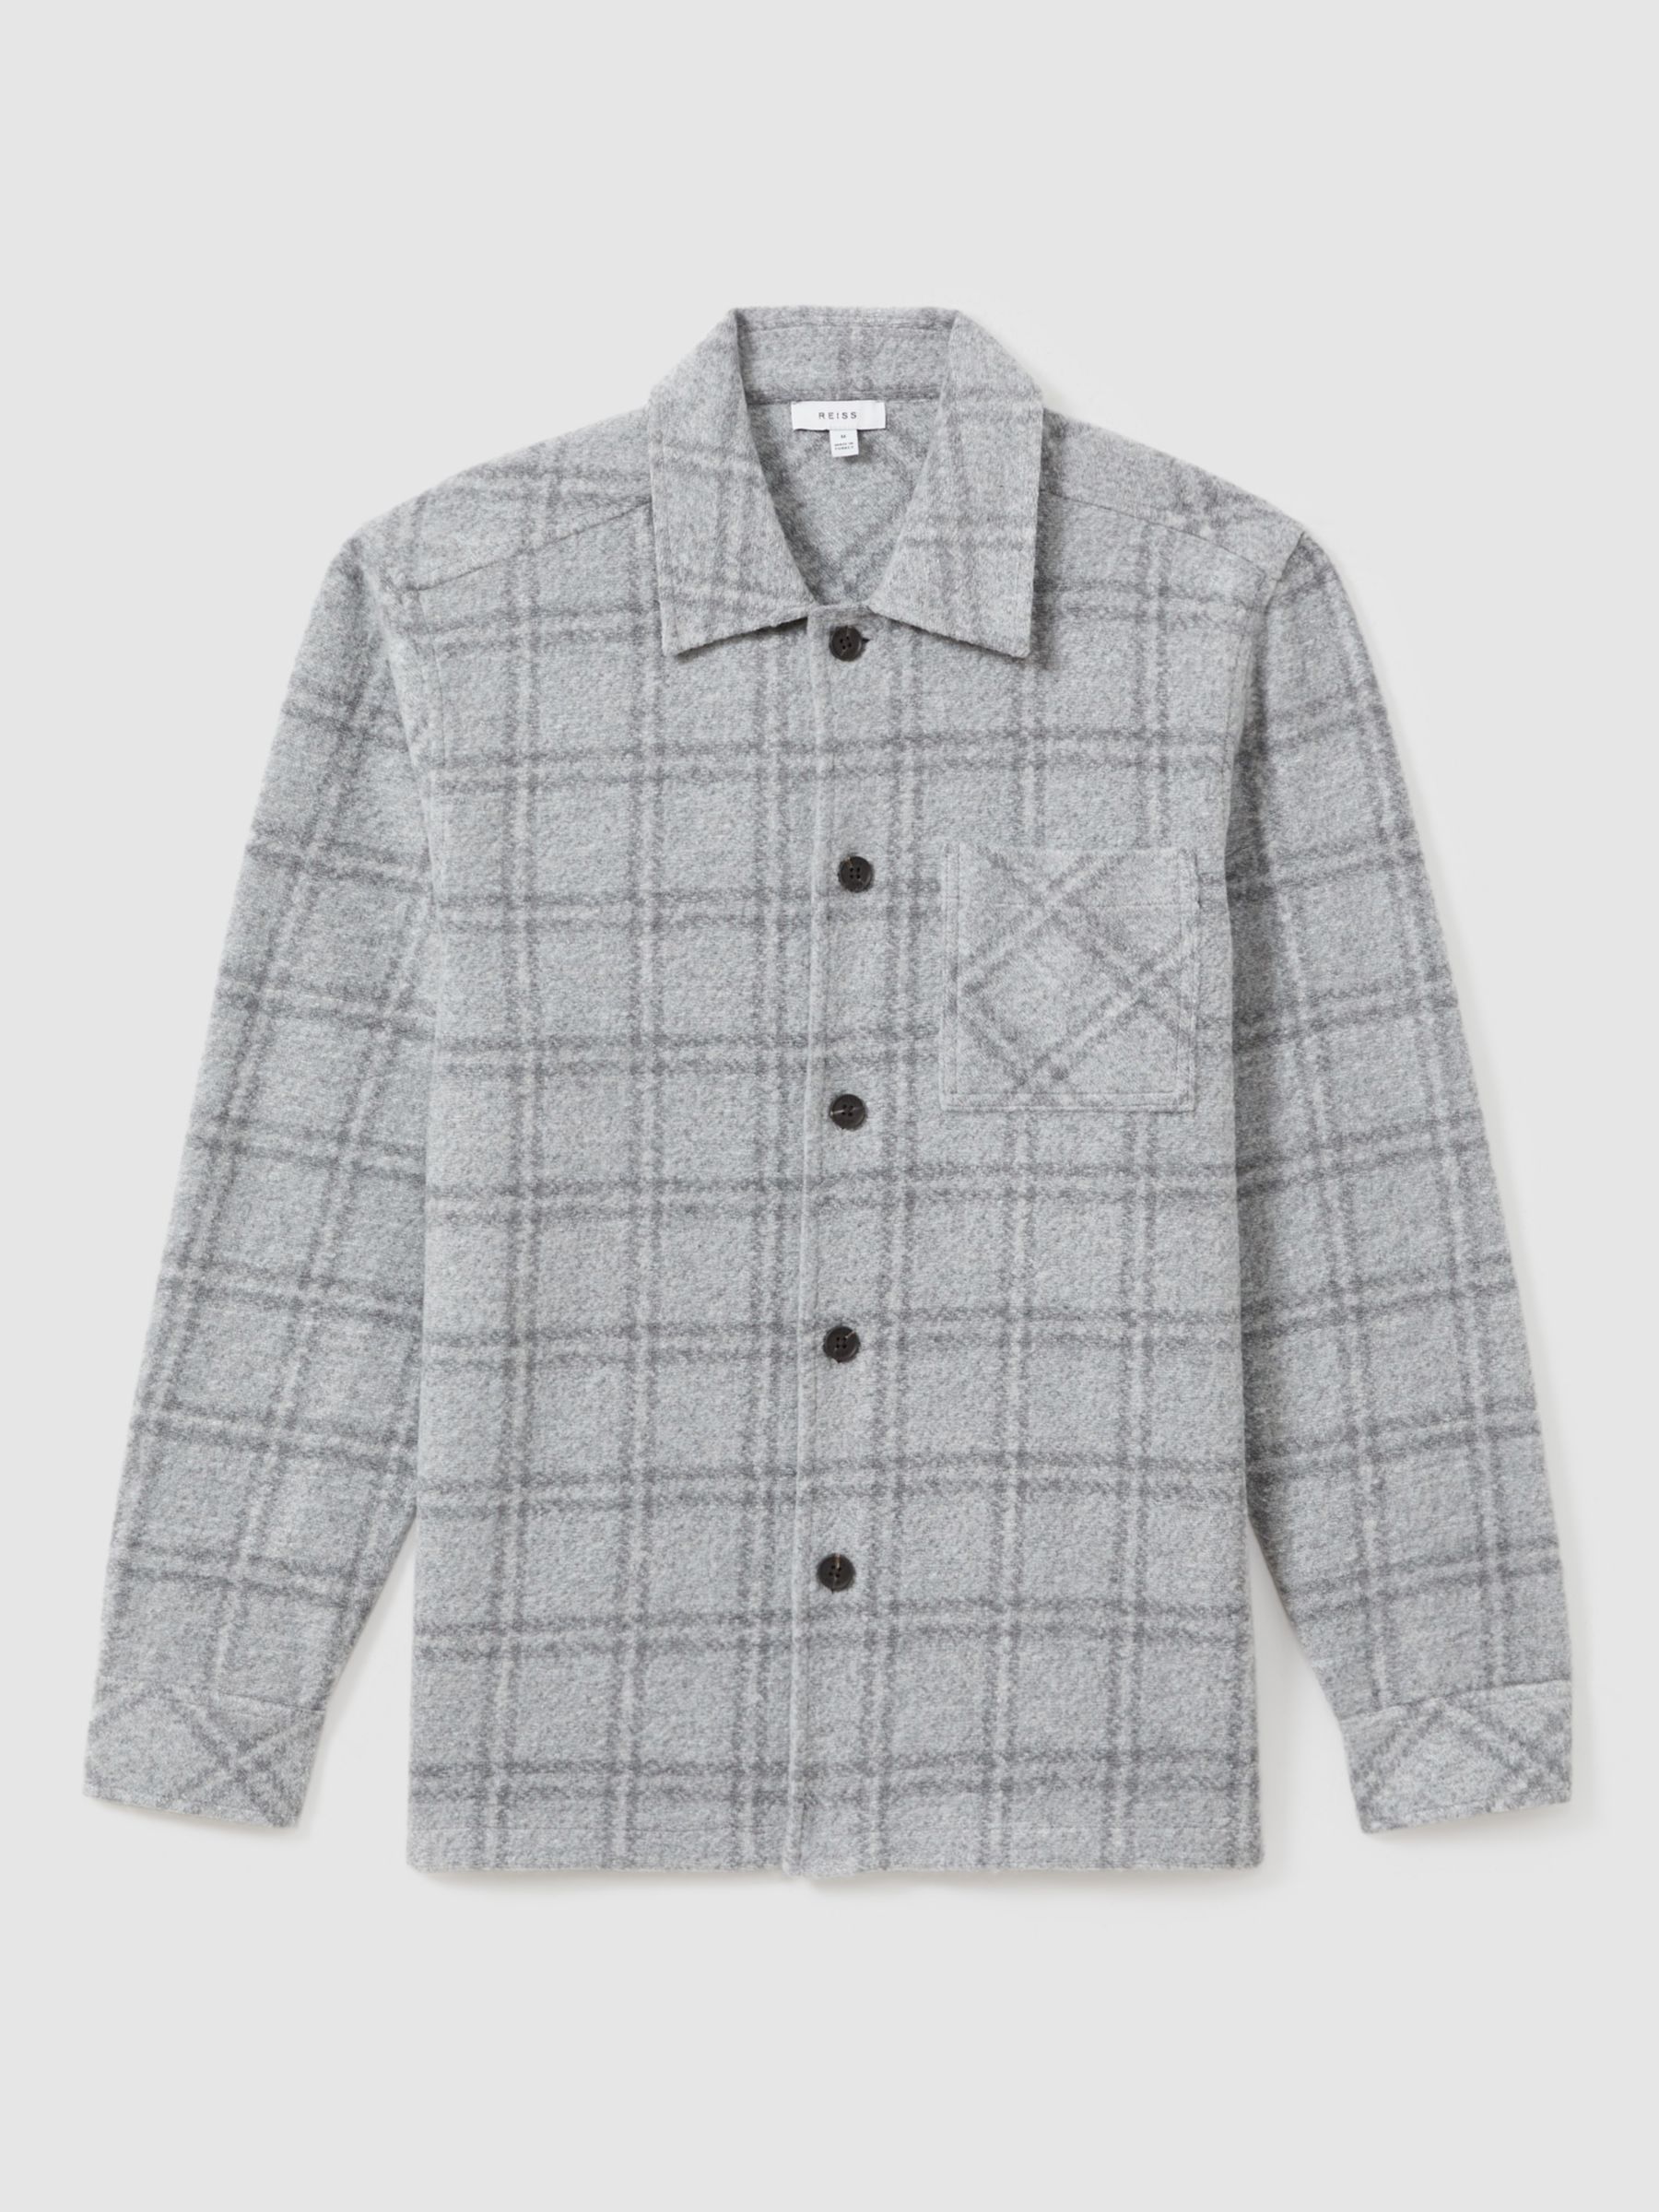 Reiss Oliver Long Sleeve Brushed Check Shirt, Soft Grey, XS